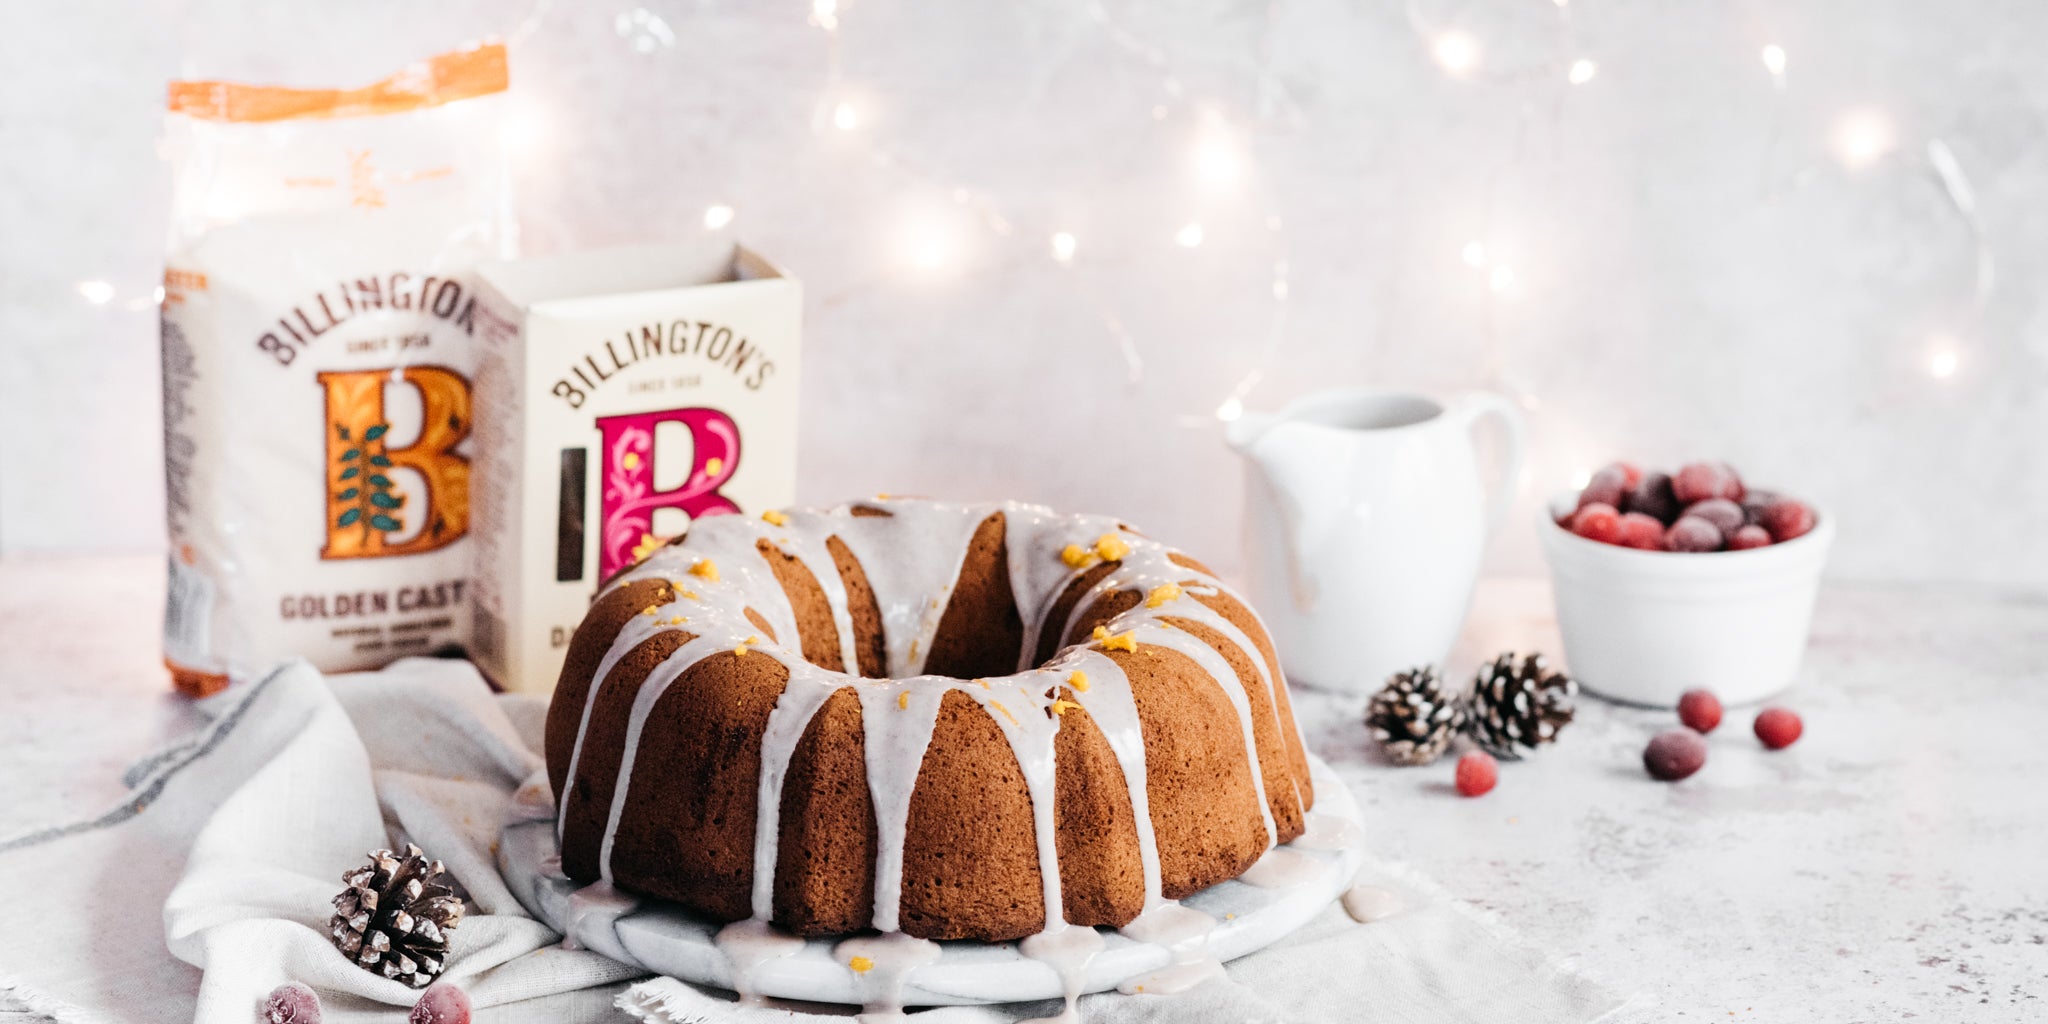 Gingerbread bundt cake with drizzling icing and sugar packs in background